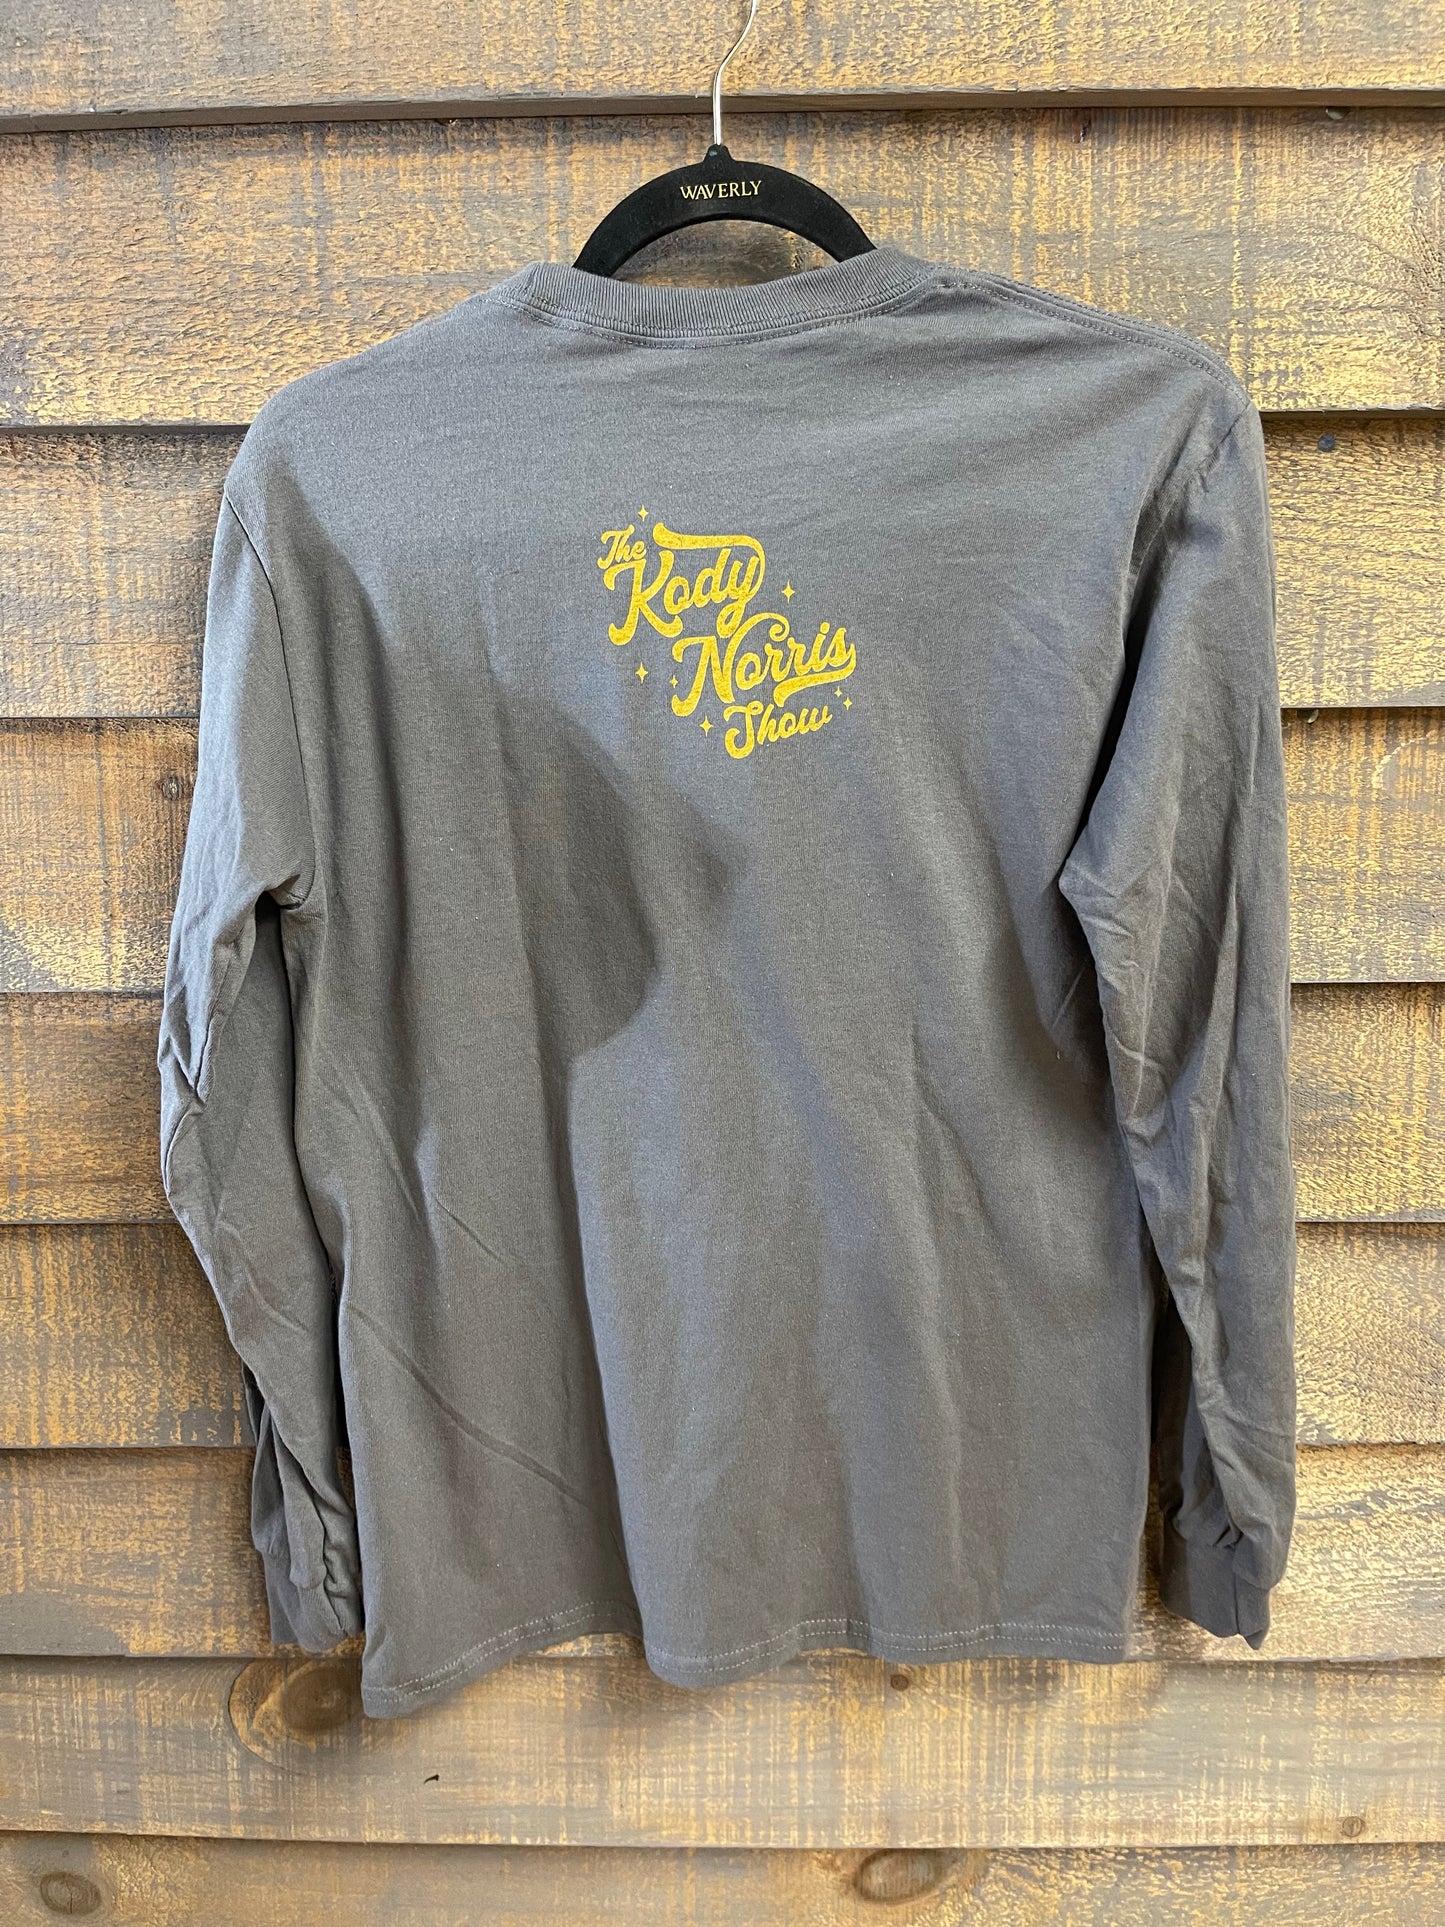 The Kody Norris Show Graphic Tee (Long Sleeve, Color Charcoal)